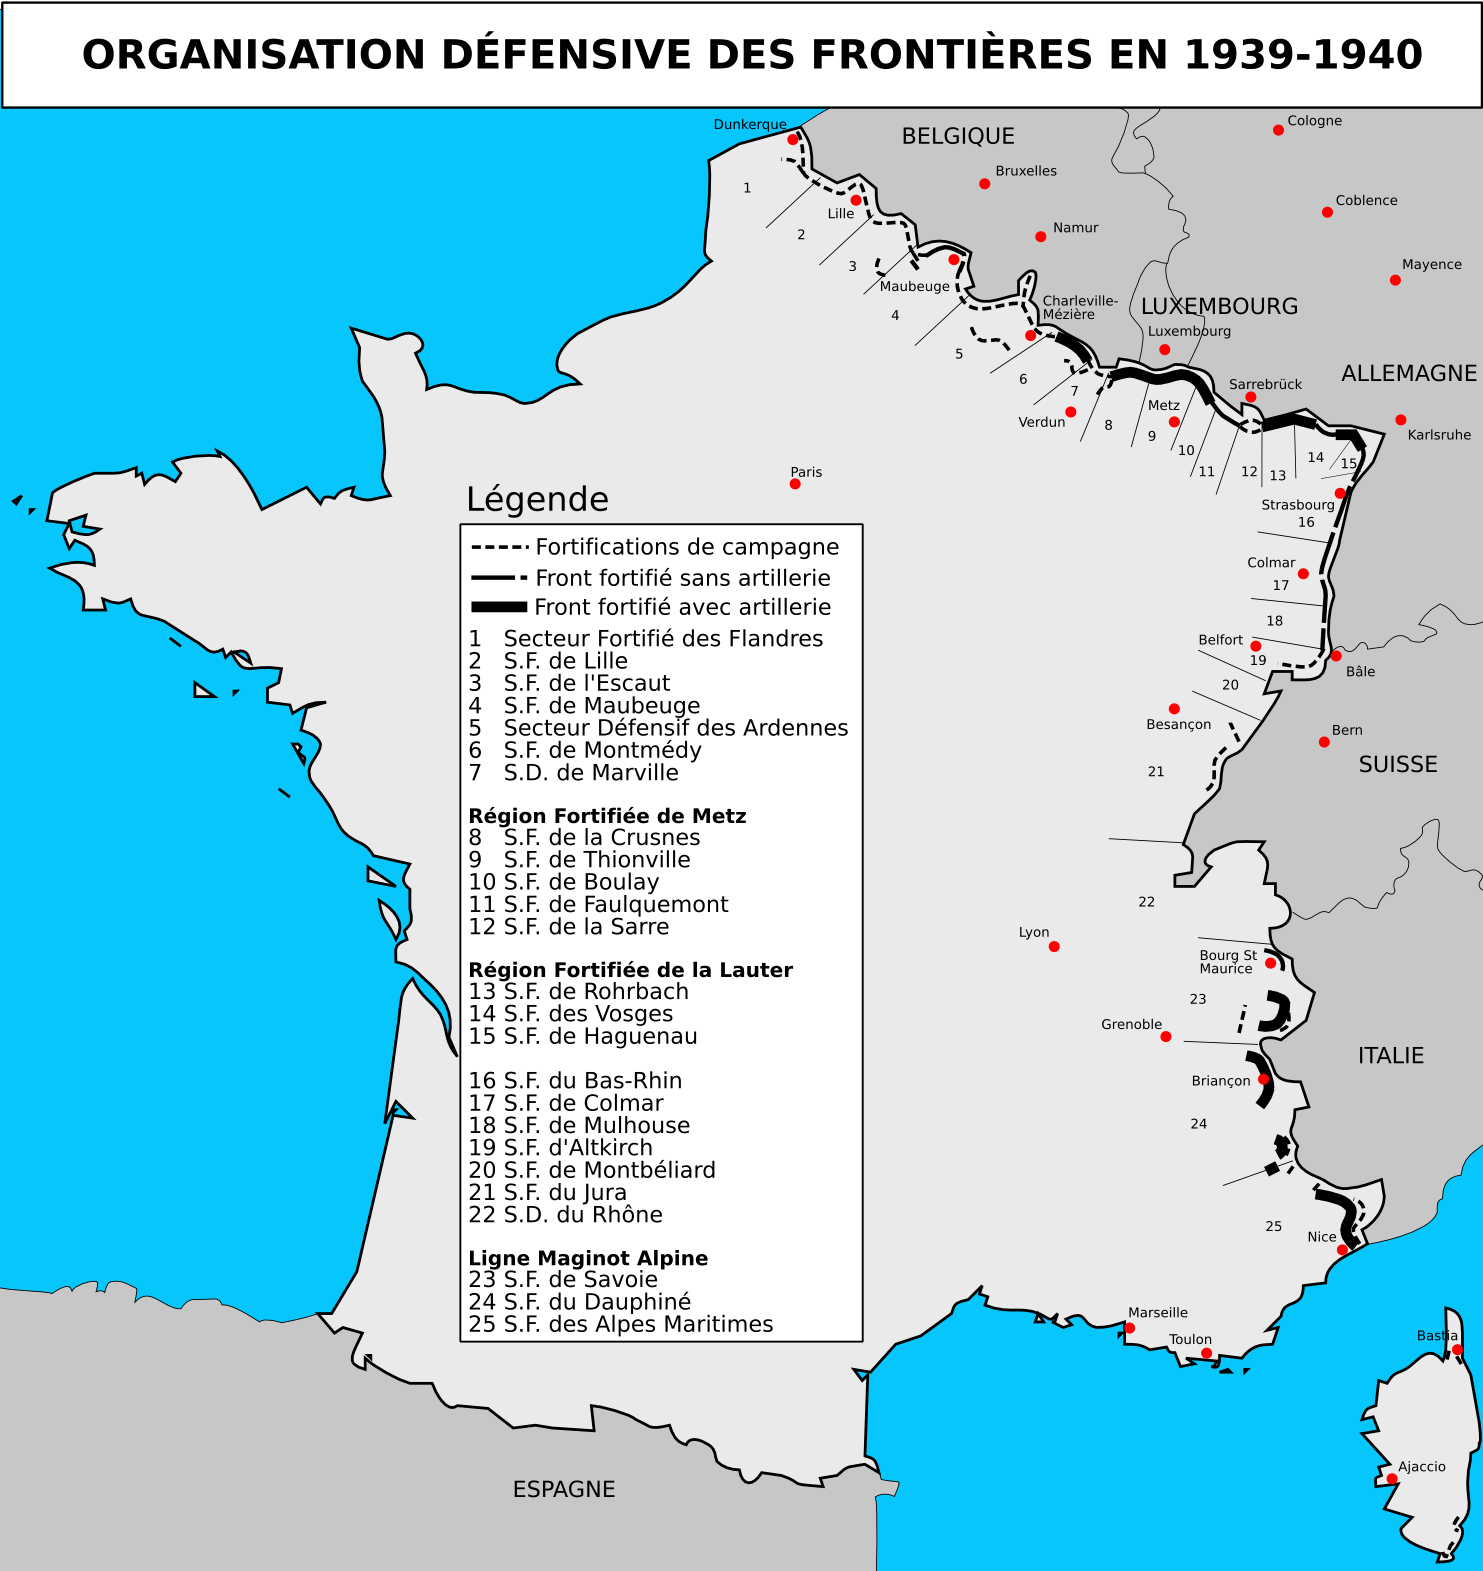 Carte de la Ligne Maginot © Duomaxw - licence [CC BY-SA 2.0 fr] from Wikimedia Commons